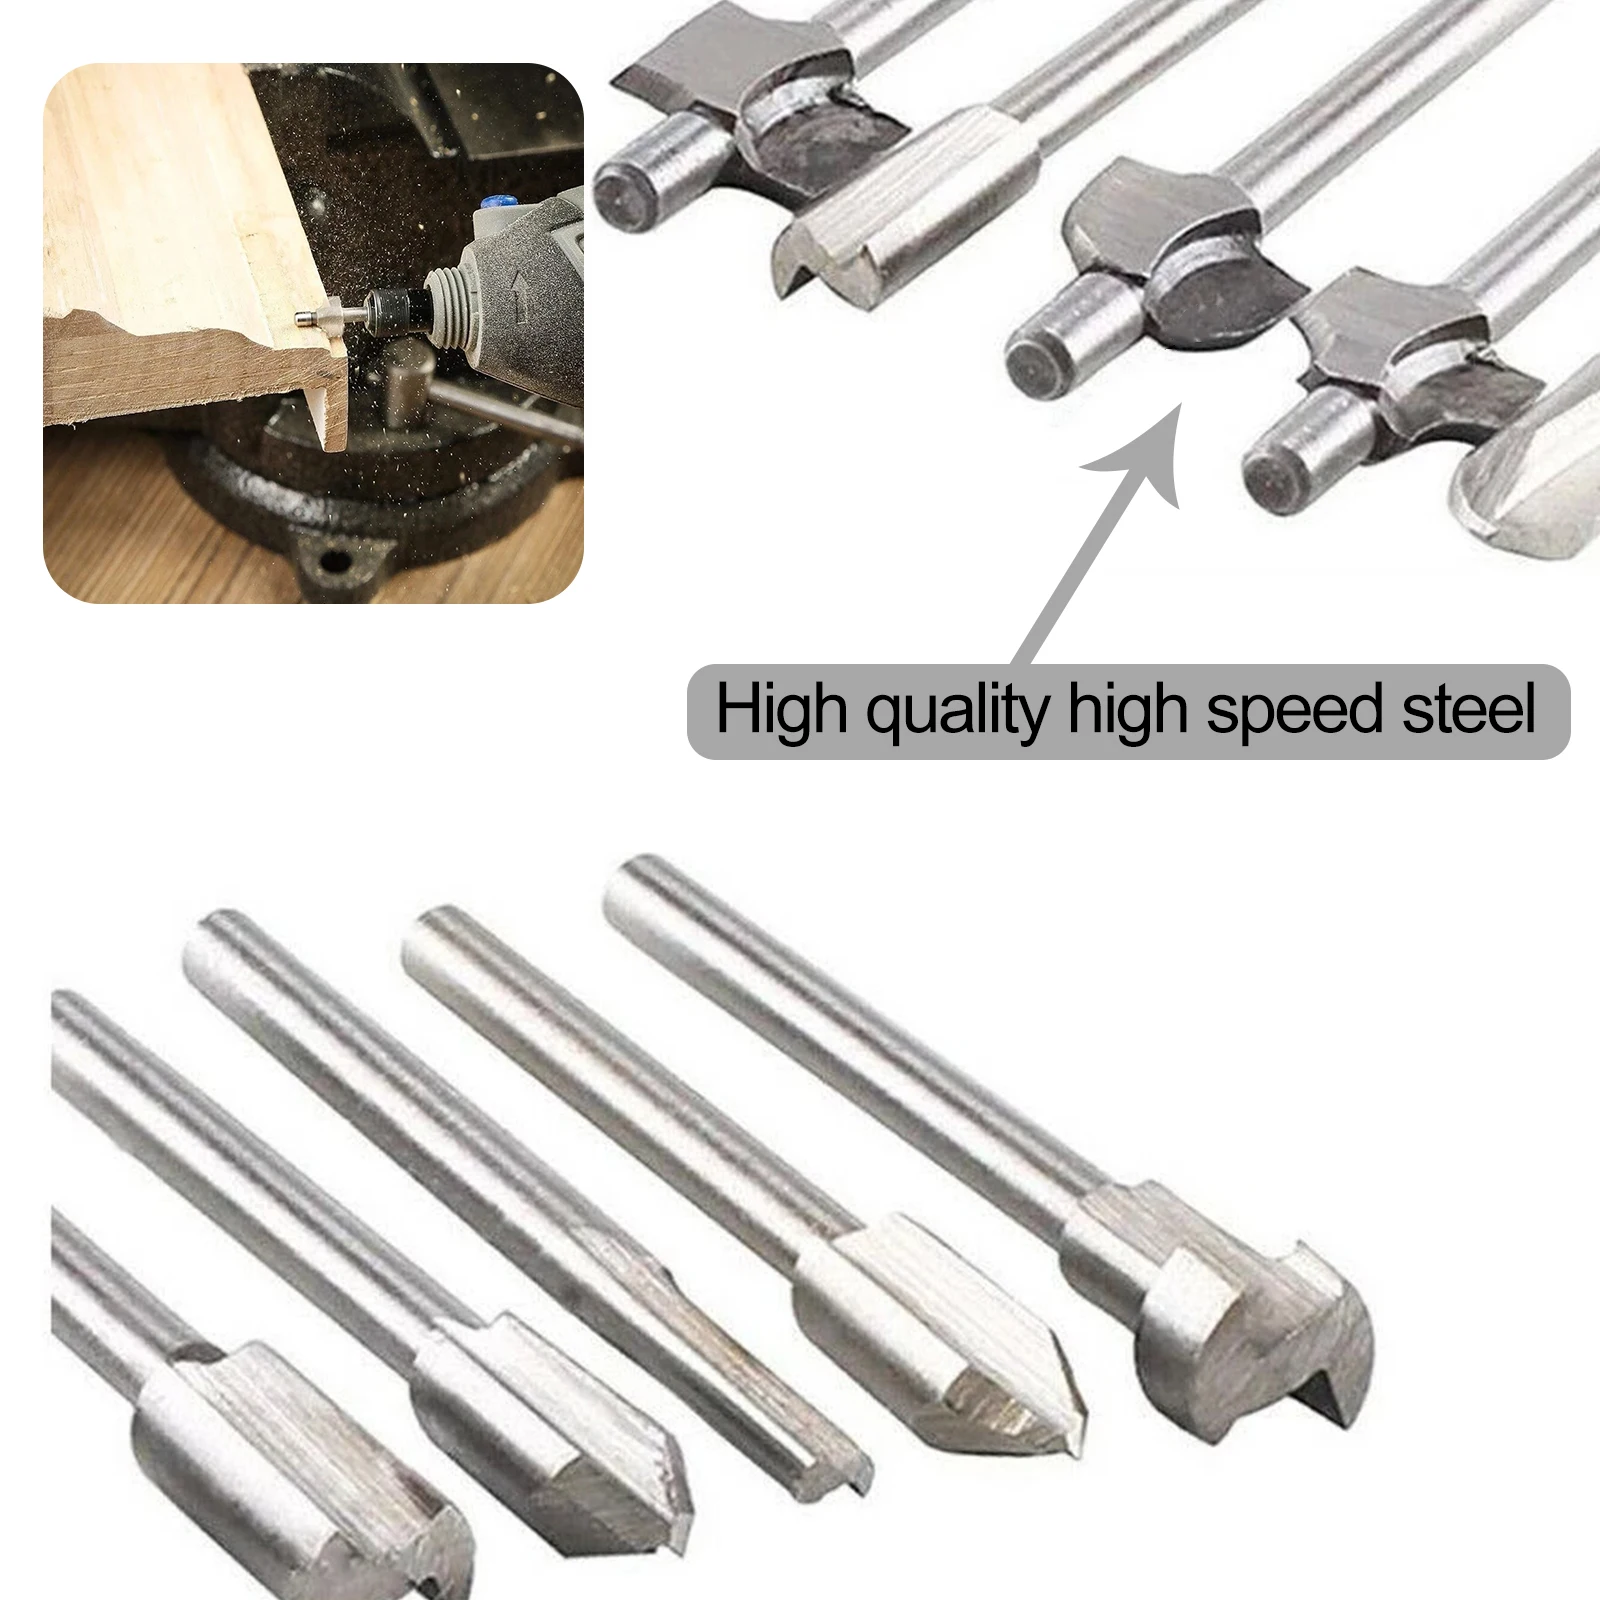 10pcs 3.2mm Routing Router Drill Bits Set Wood Stone Metal Root Carving Milling Cutter For Dremel Rotary Tool wooden jewelers ring clamp wood wedge leather jaws hand tool stone setting engraving repair jewelry making tool